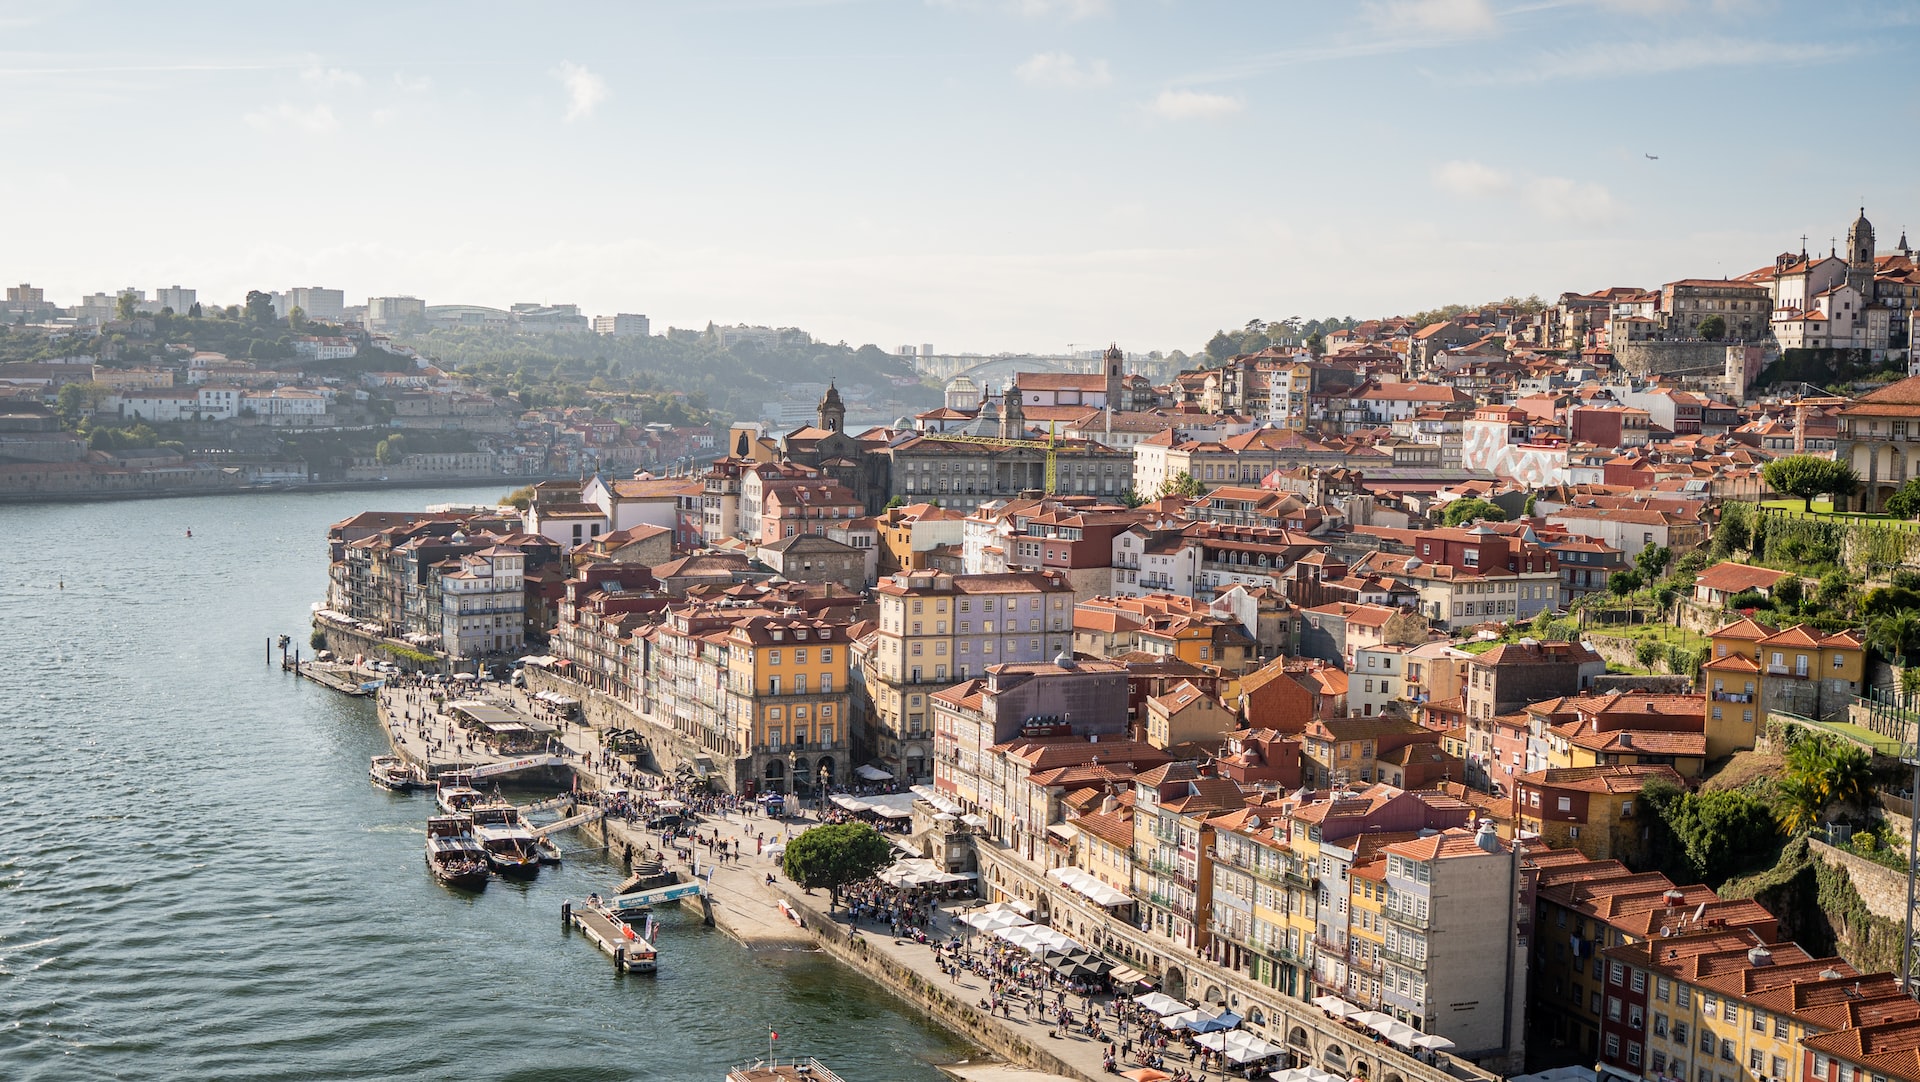 Red-roofed buildings leading down to the waterside in Porto.